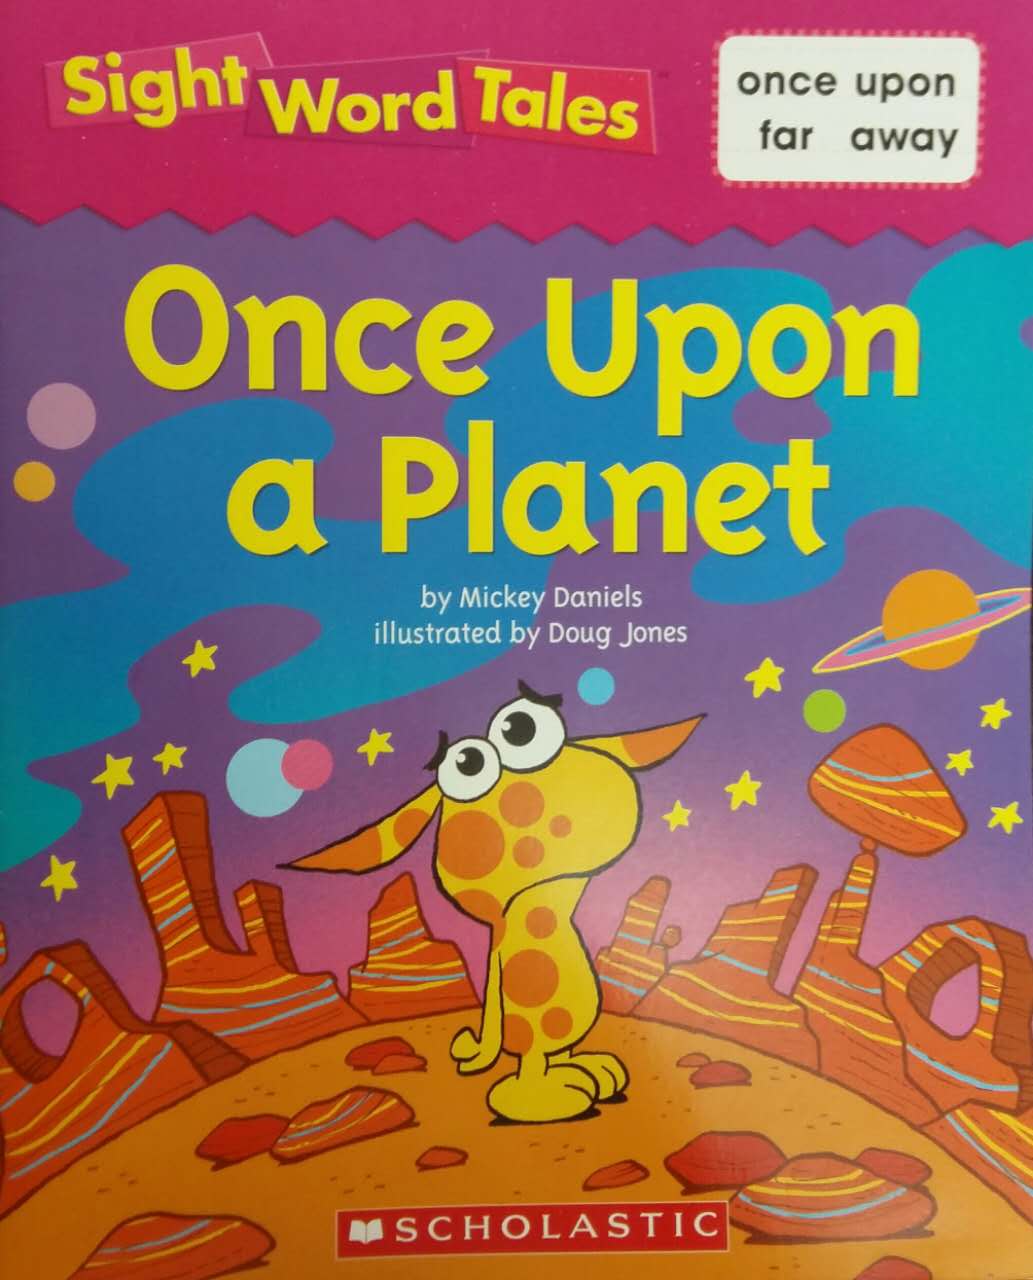 Sight word tales: Once Upon a planet